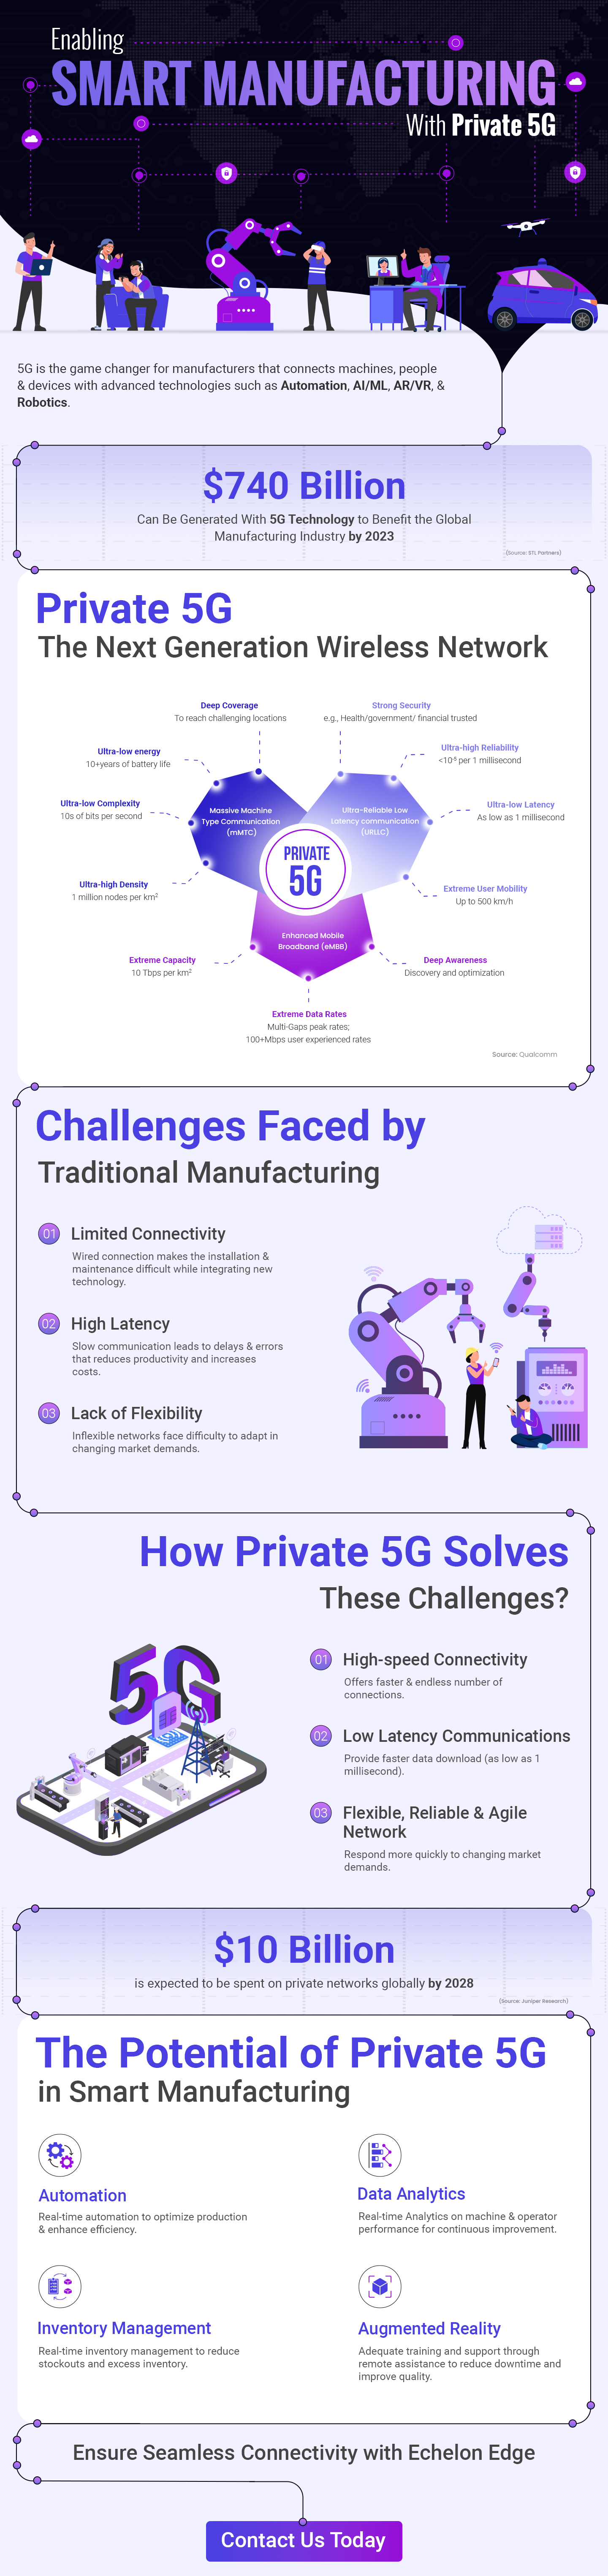 Smart Manufacturing full infographic